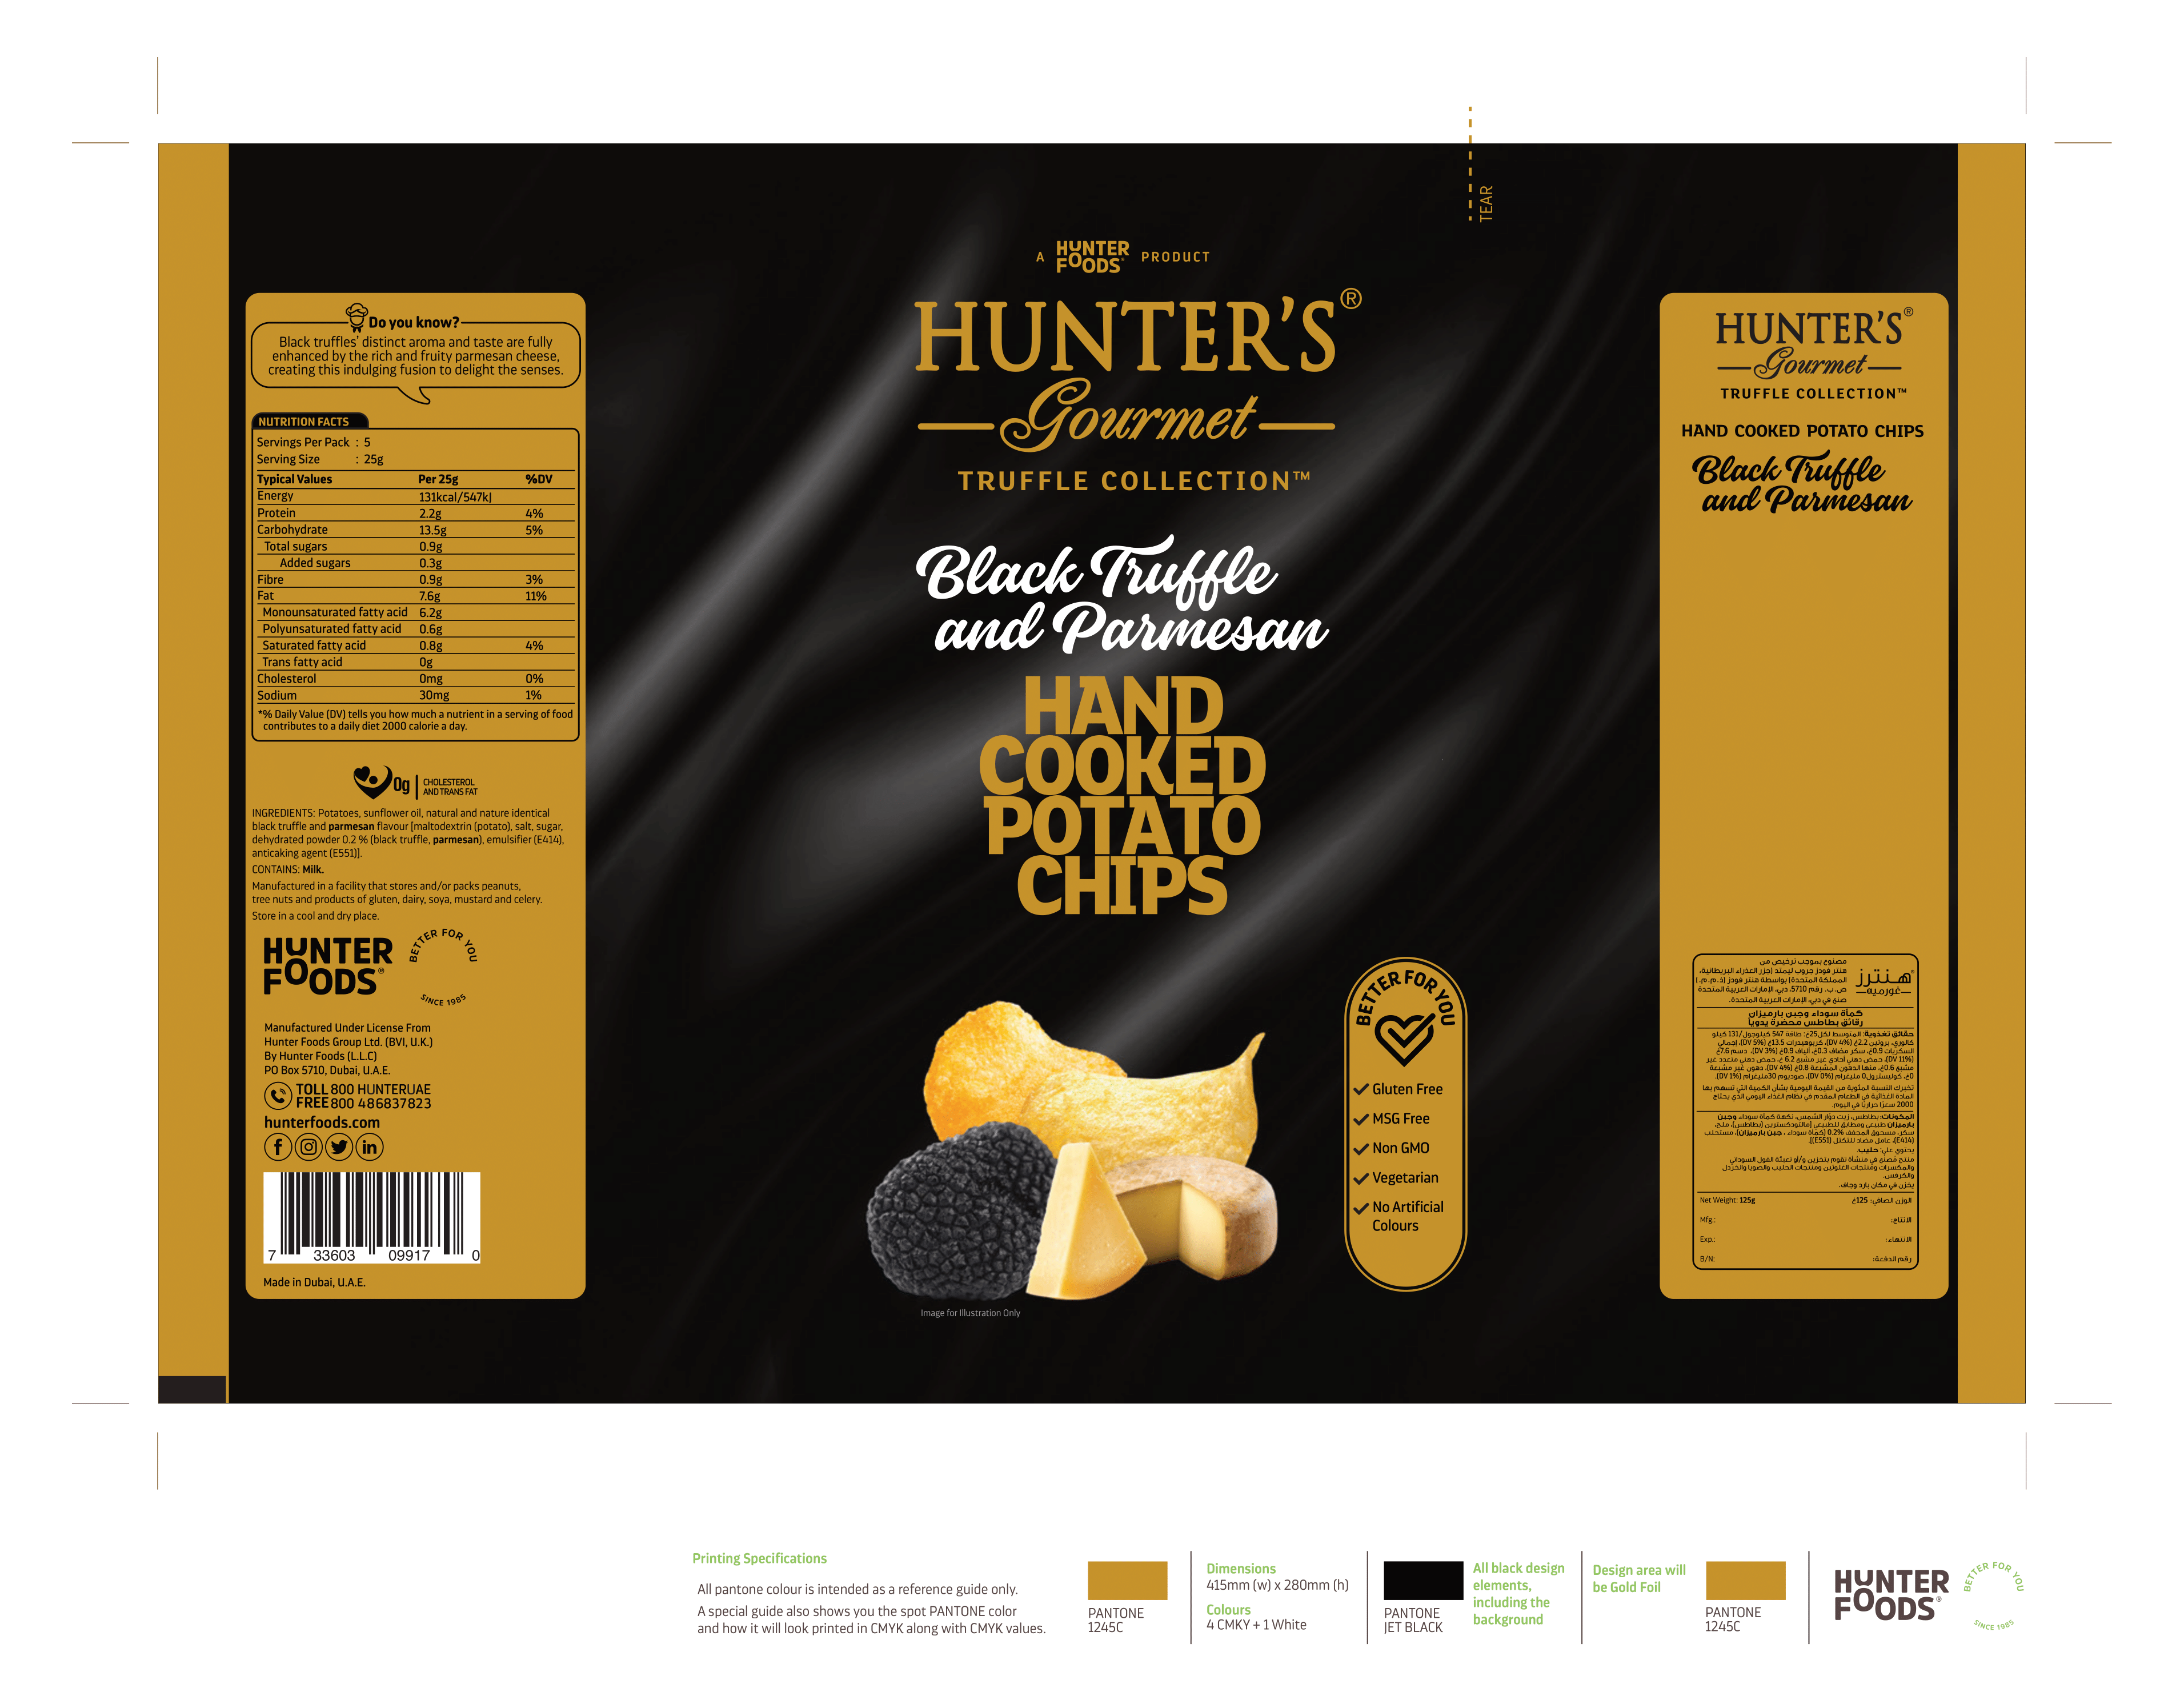 Hunter's Gourmet Hand Cooked Potato Chips Black Truffle and Parmesan 12 units per case 125 g Product Label